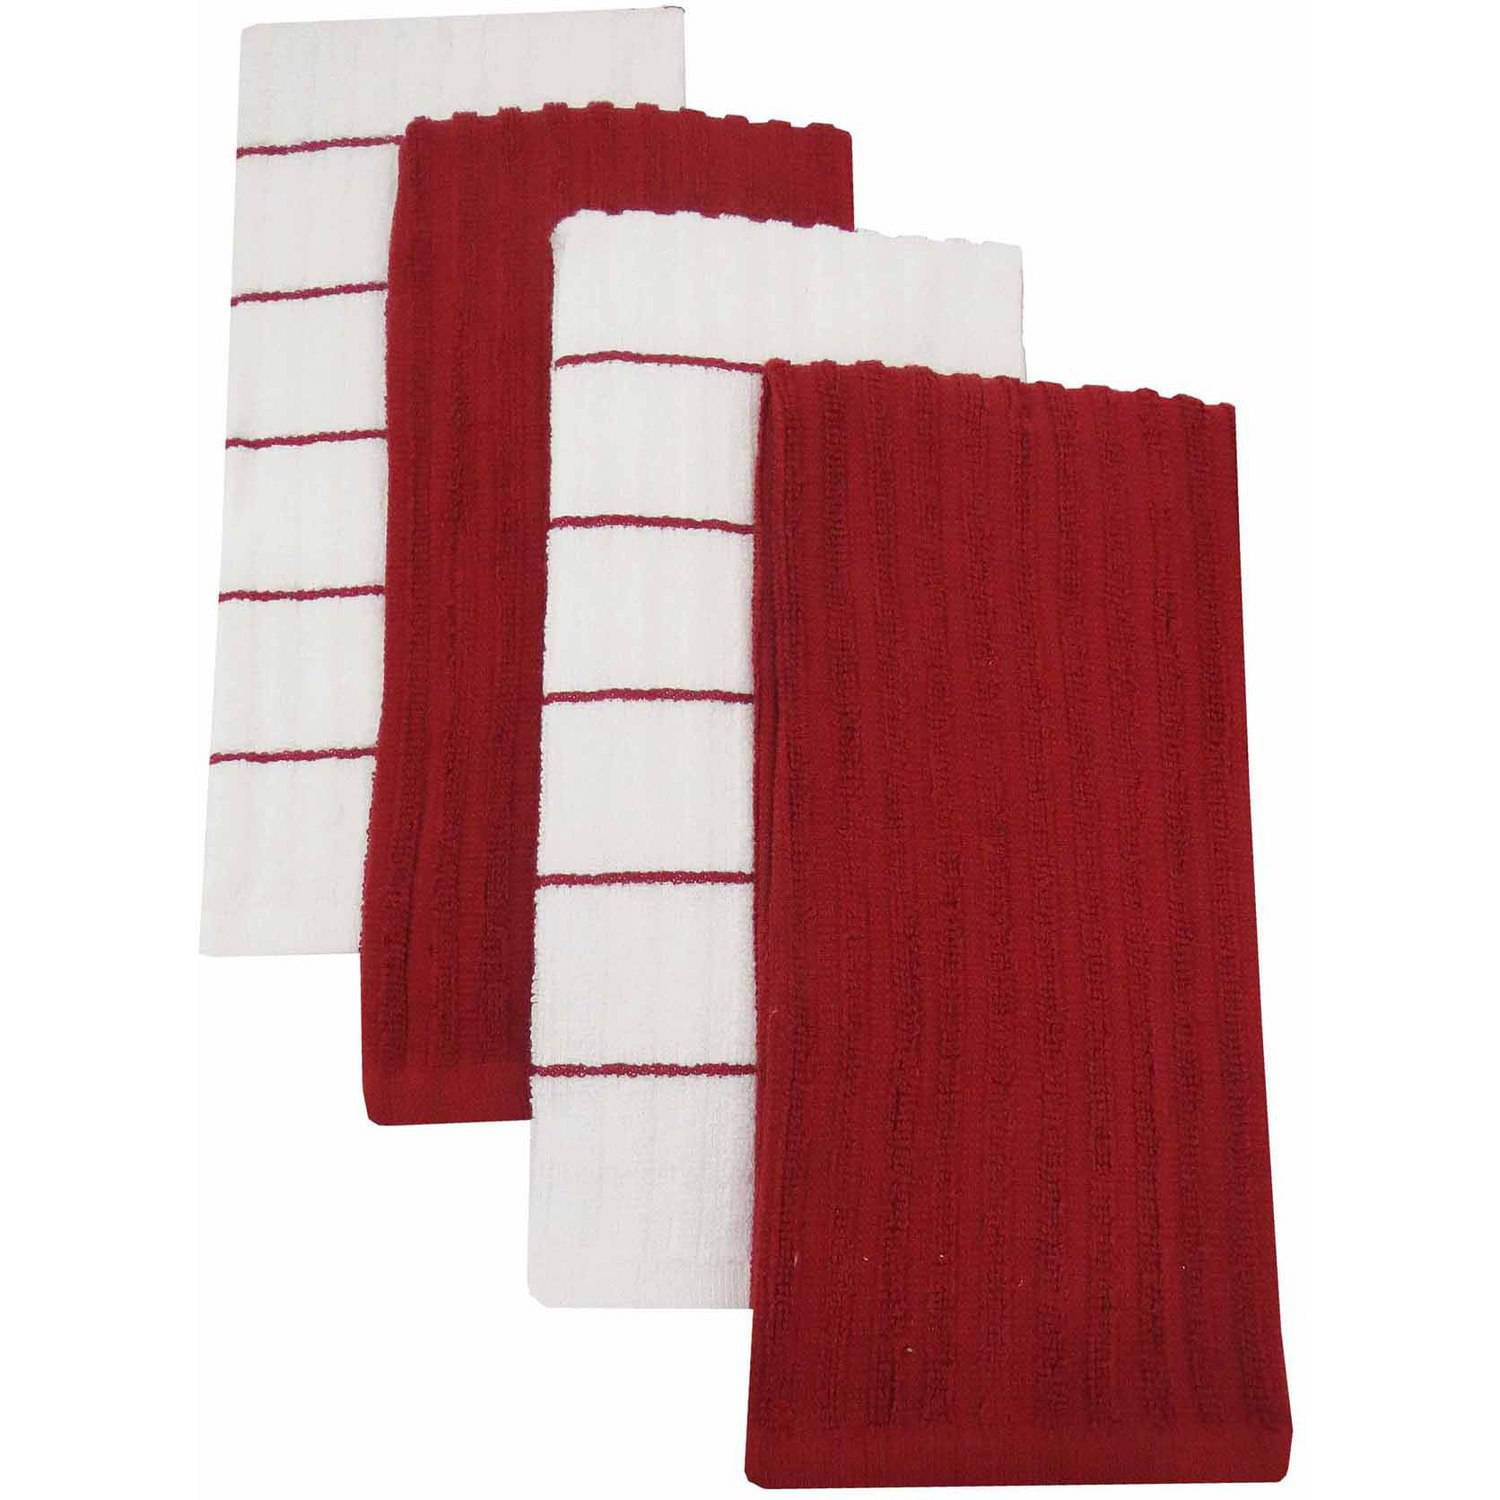 Sloppy Chef Farm Fresh Red Truck Kitchen Towel 2-Piece Set (Bulk Case of 48  Sets, 96 Total Towels), 16x24, Red, Grey and Black